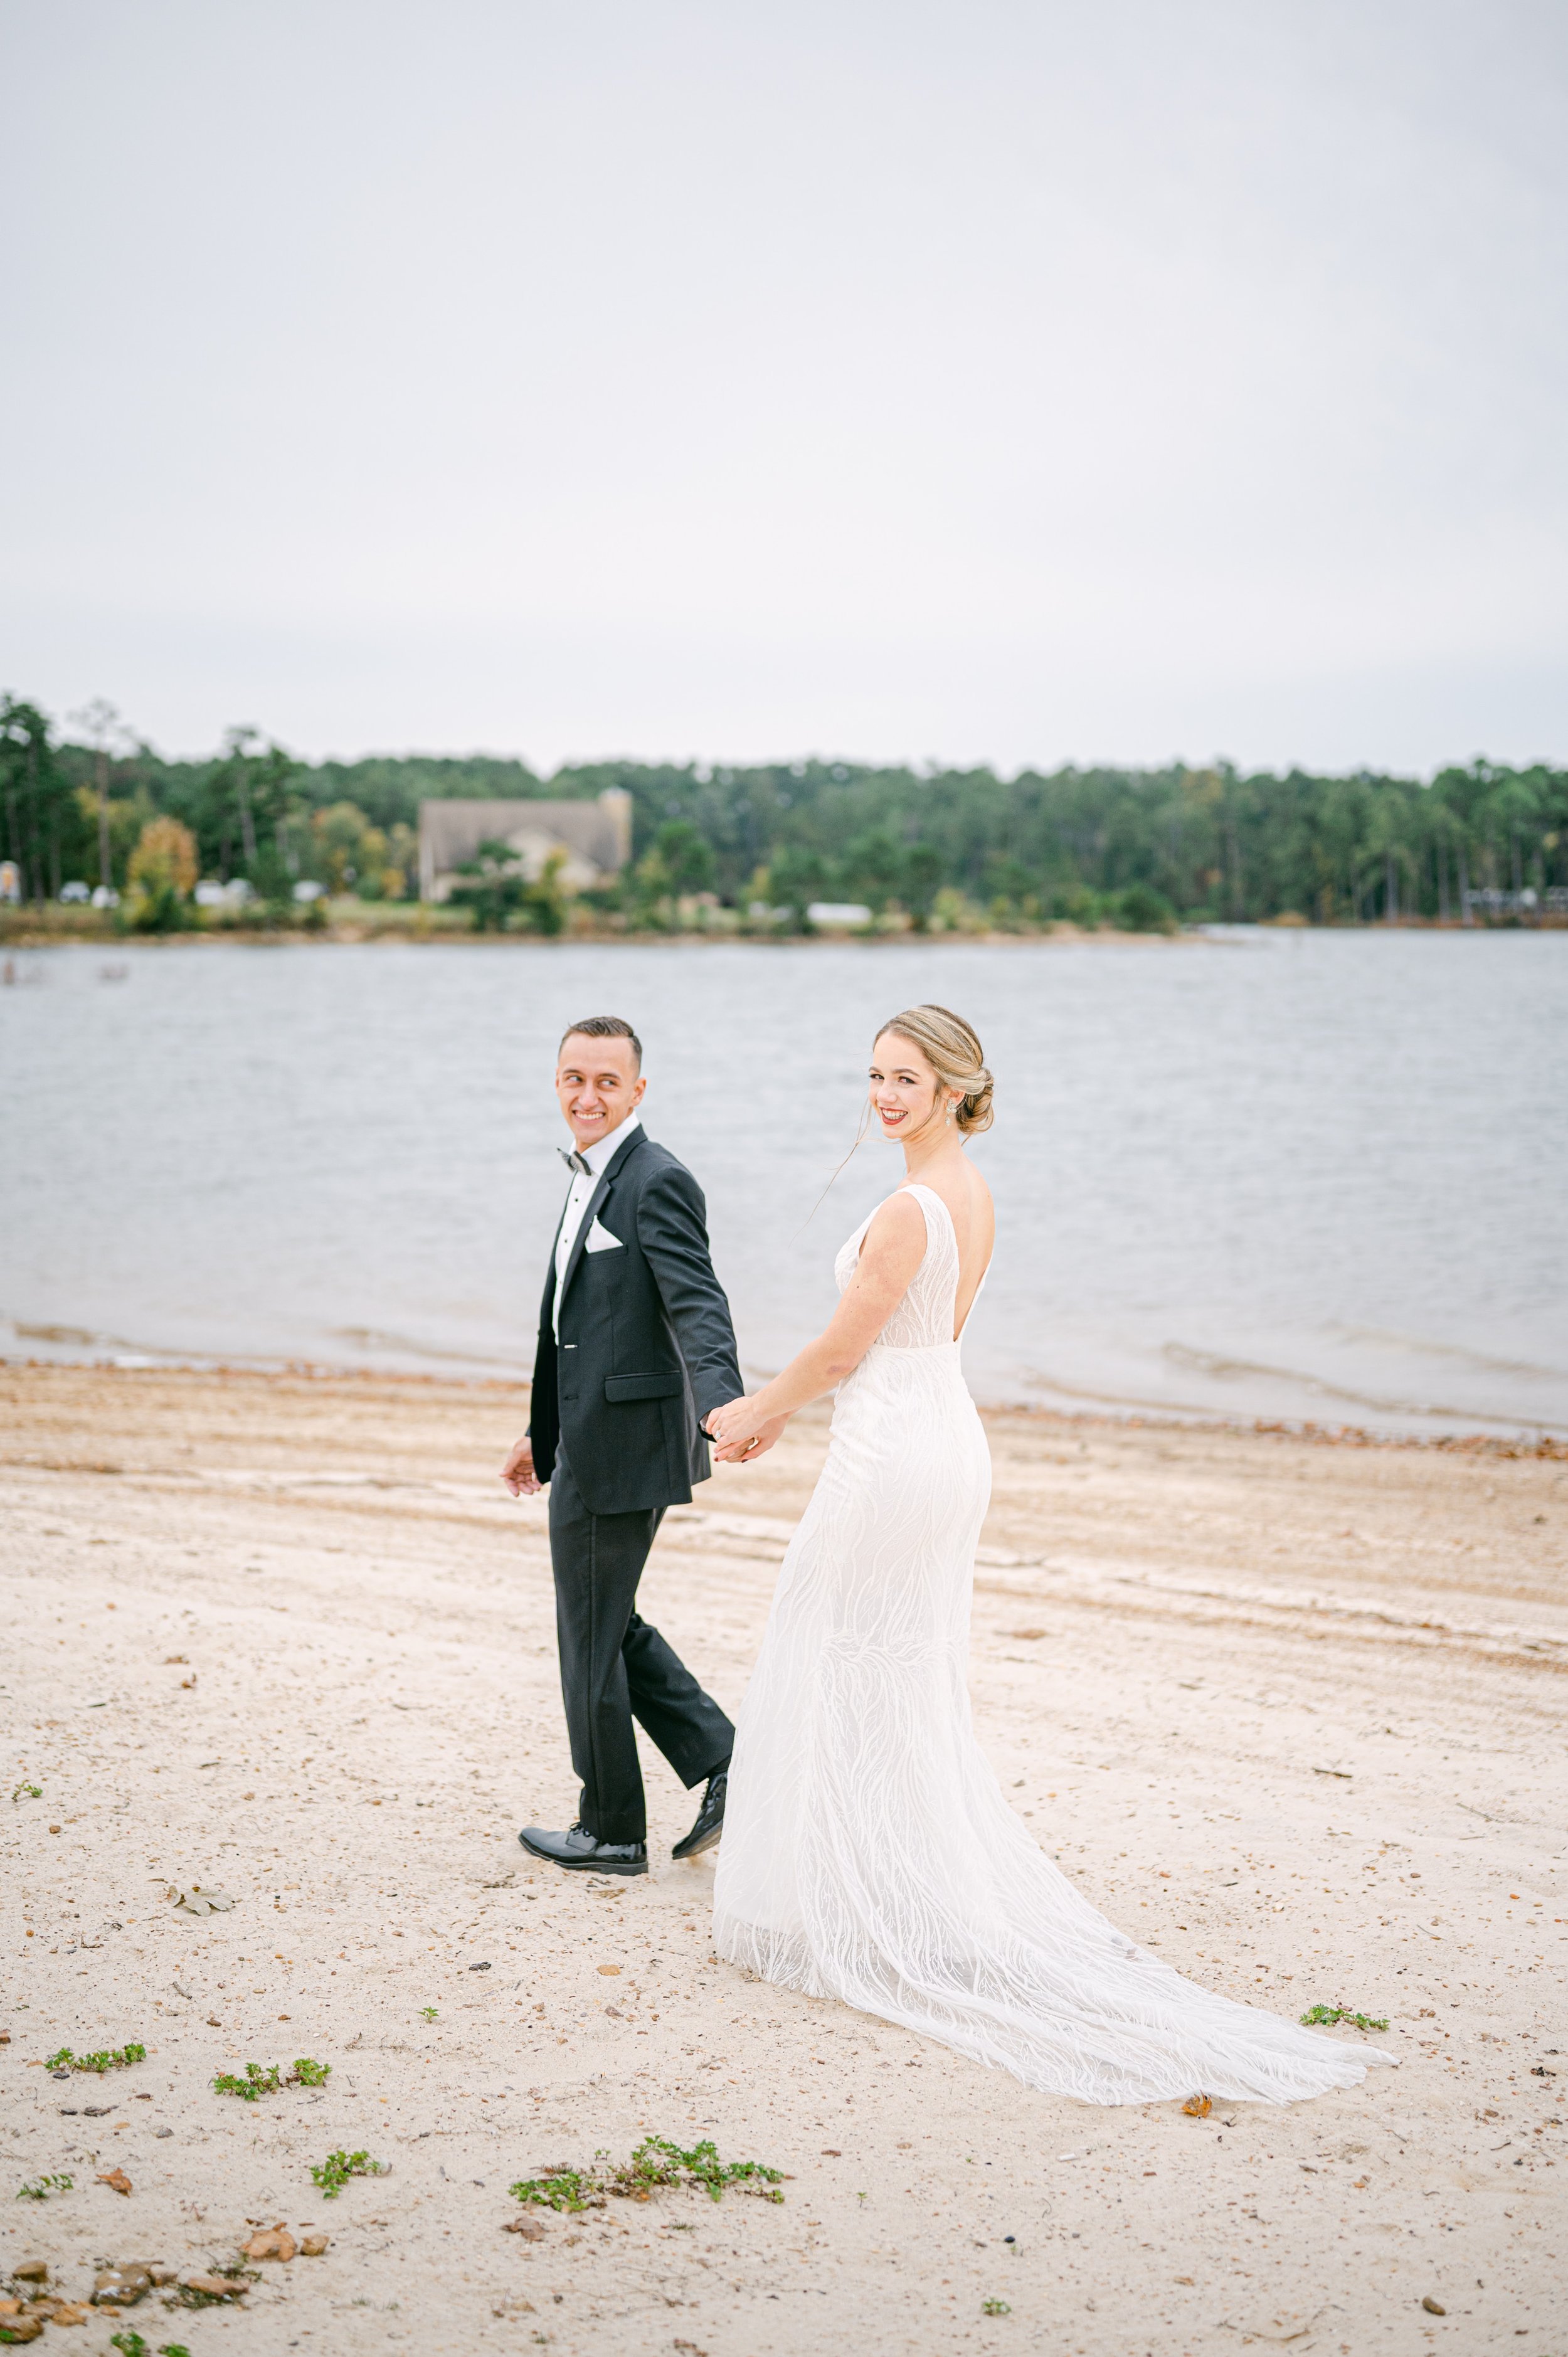 ivory-and-beau-bride-taylor-real-bride-ryder-made-with-love-wedding-dress-bridal-gown-wedding-gown-classic-bride-savannah-bridal-shop-bridal-boutique-bridal-shopping-bridal-style-bridal-inspo-2021-11-6 Taylor-and-Ben-Augusta-Wedding-Photographer-584.jpg